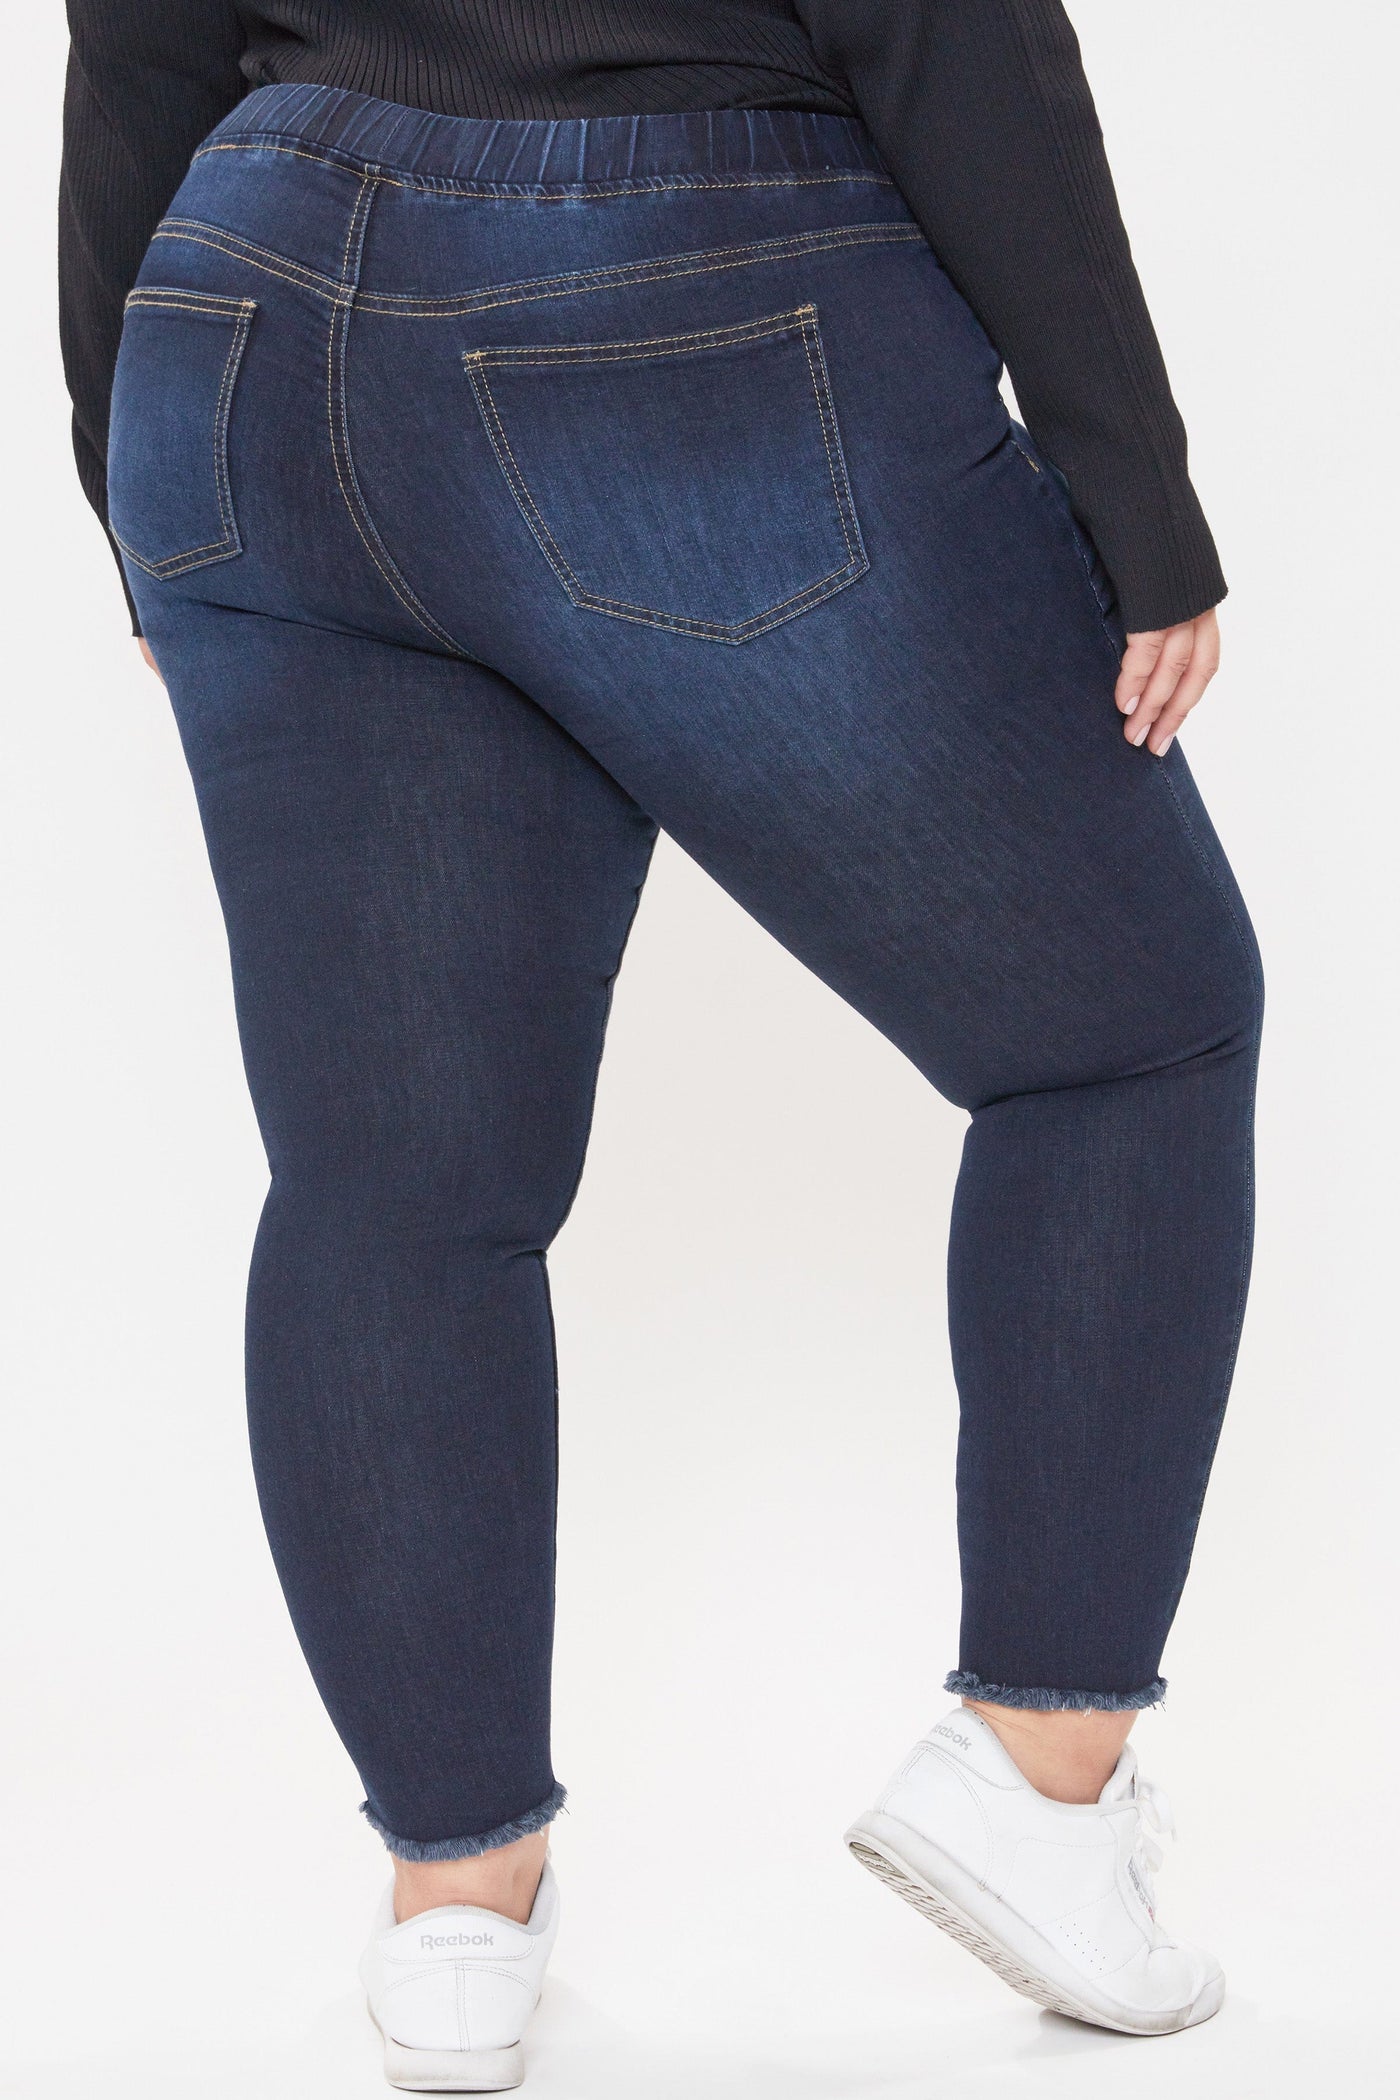 ROYALTY FOR ME Jogger Women Plus Size High-Rise Denim Ankle Jogger 6 Pack